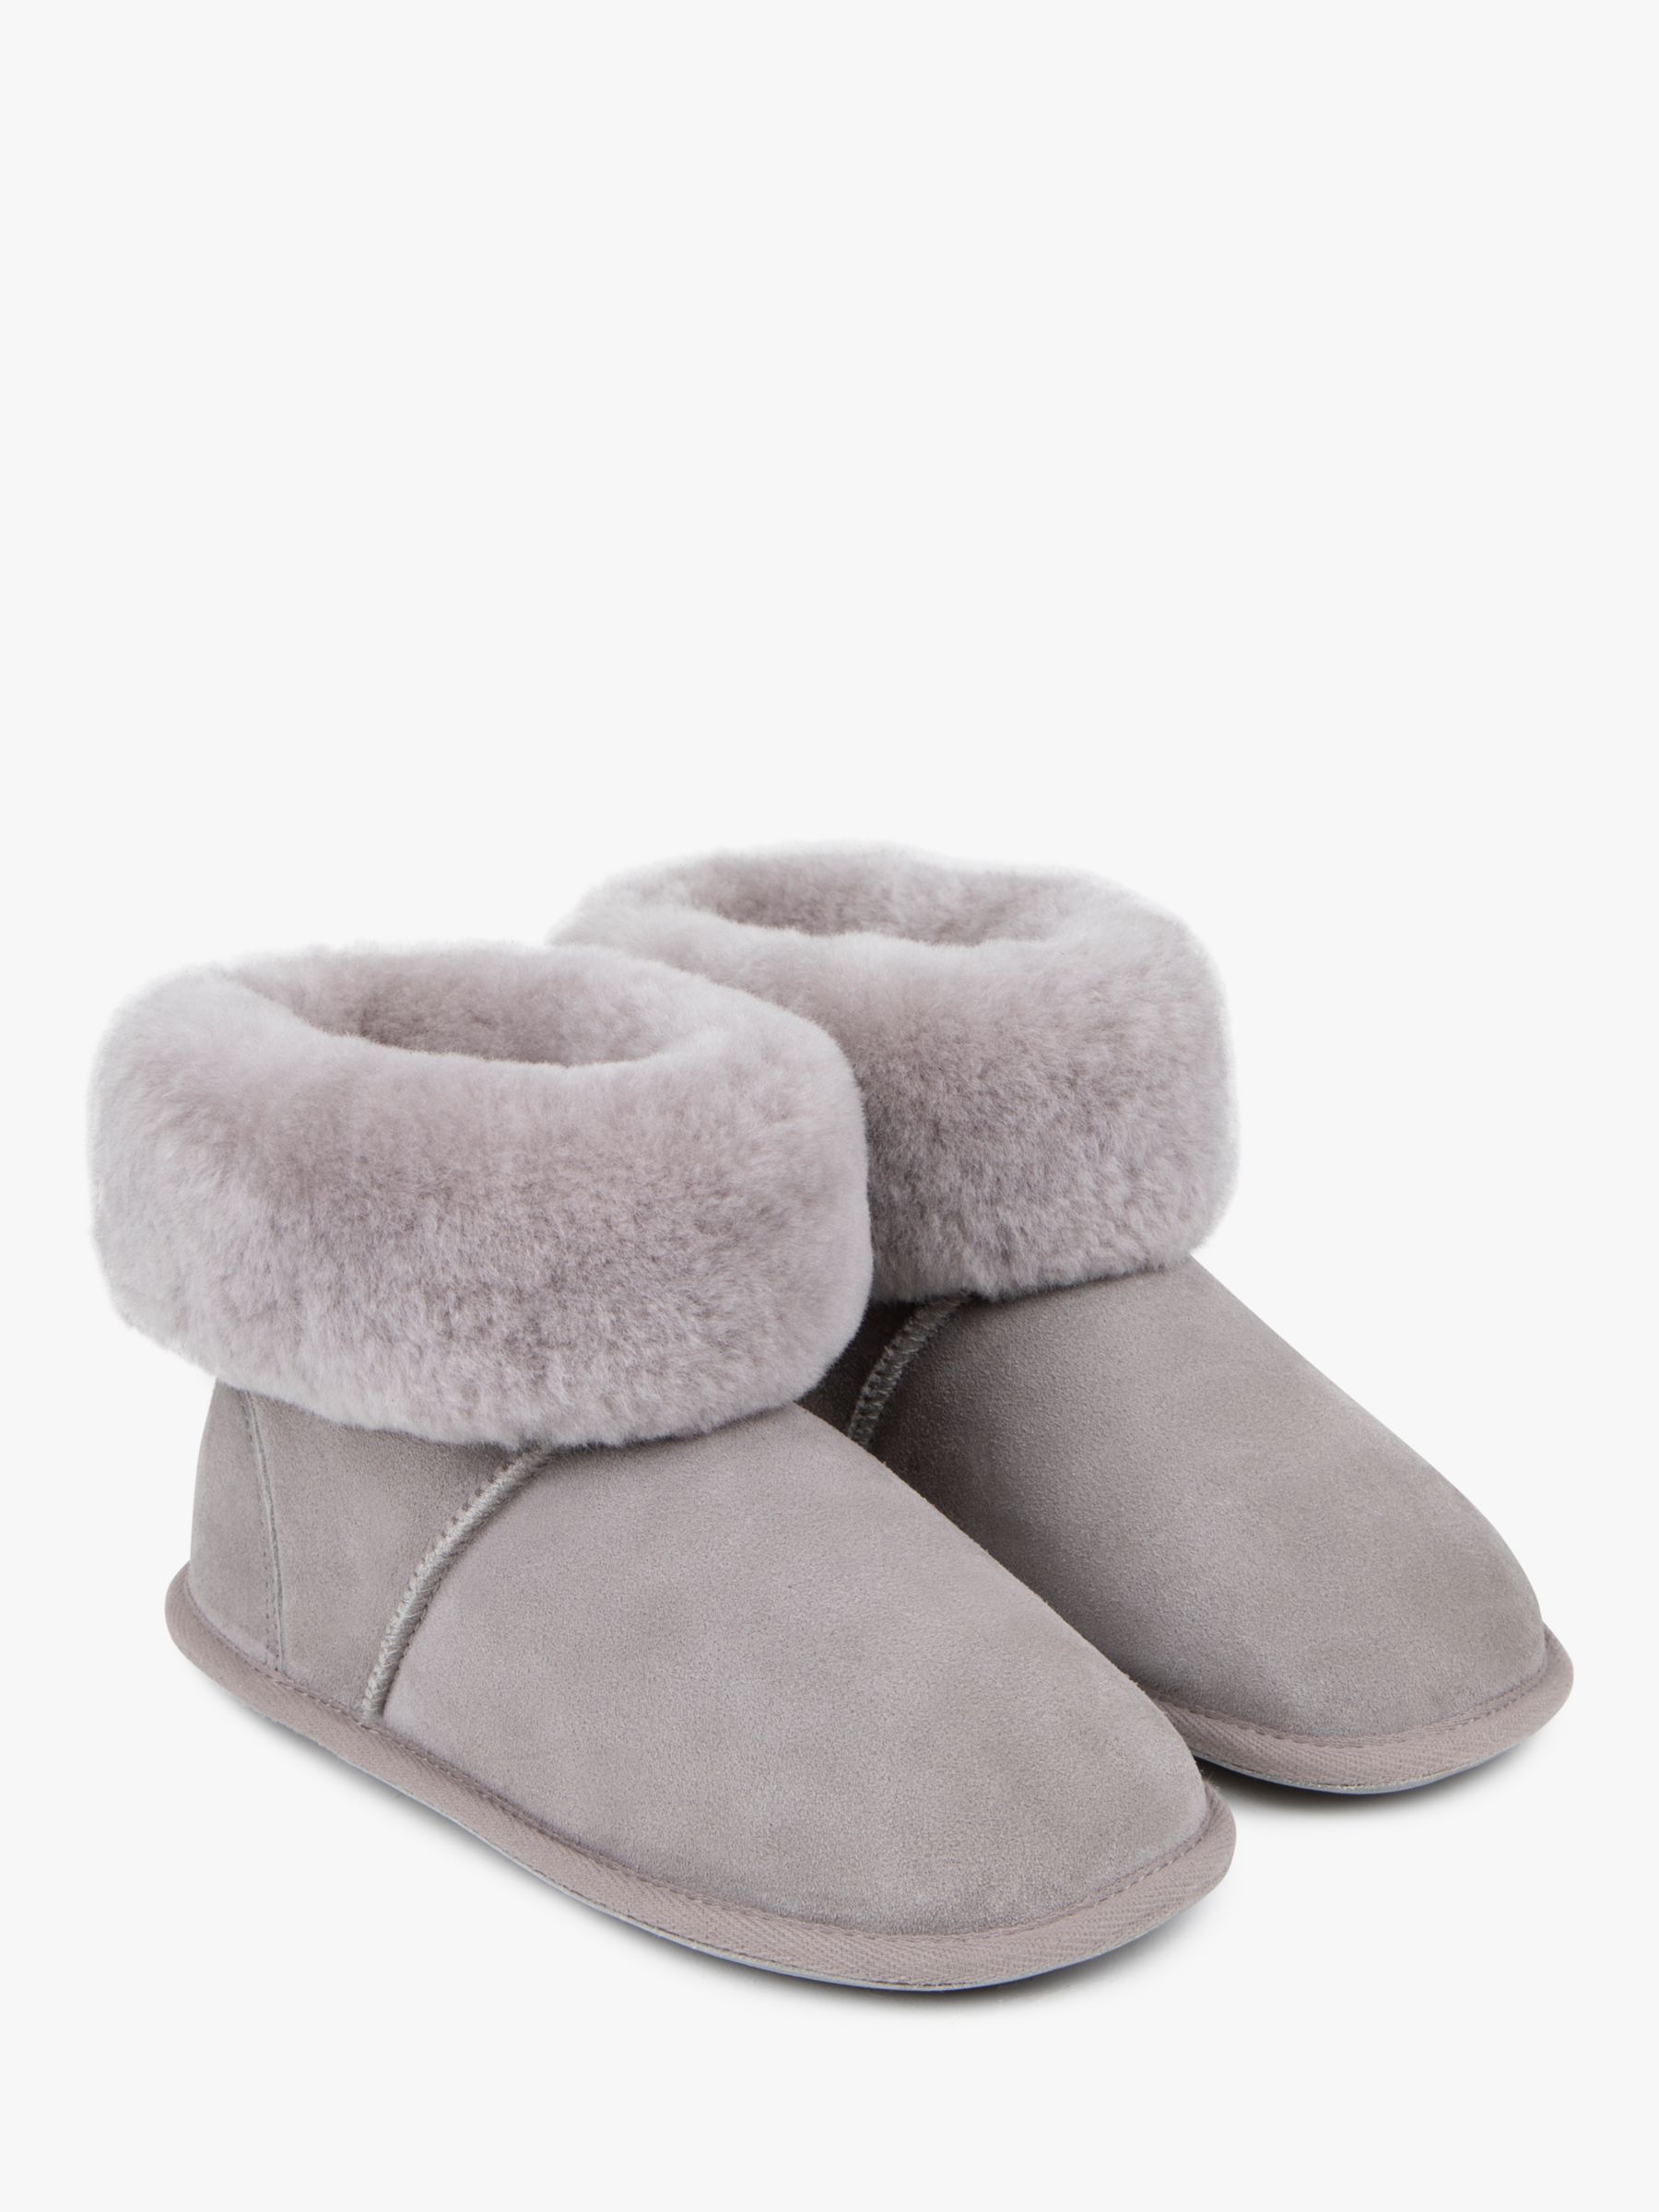 Just Sheepskin Albery Suede Slipper Boots, Light Grey at John Lewis ...